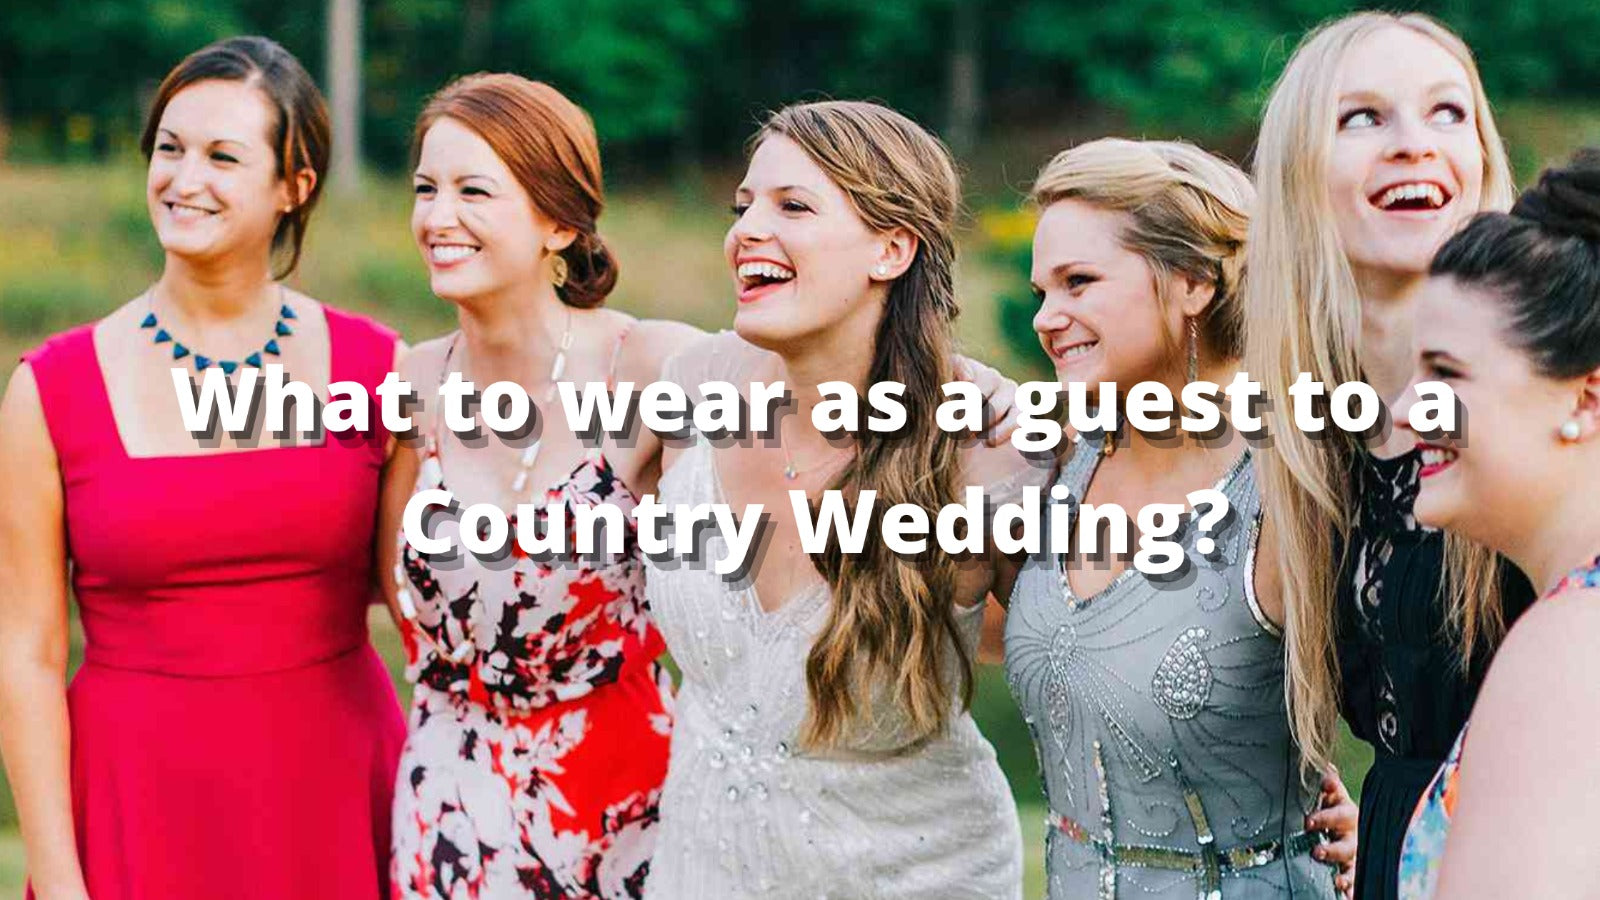 What to wear as a guest to a Country Wedding?